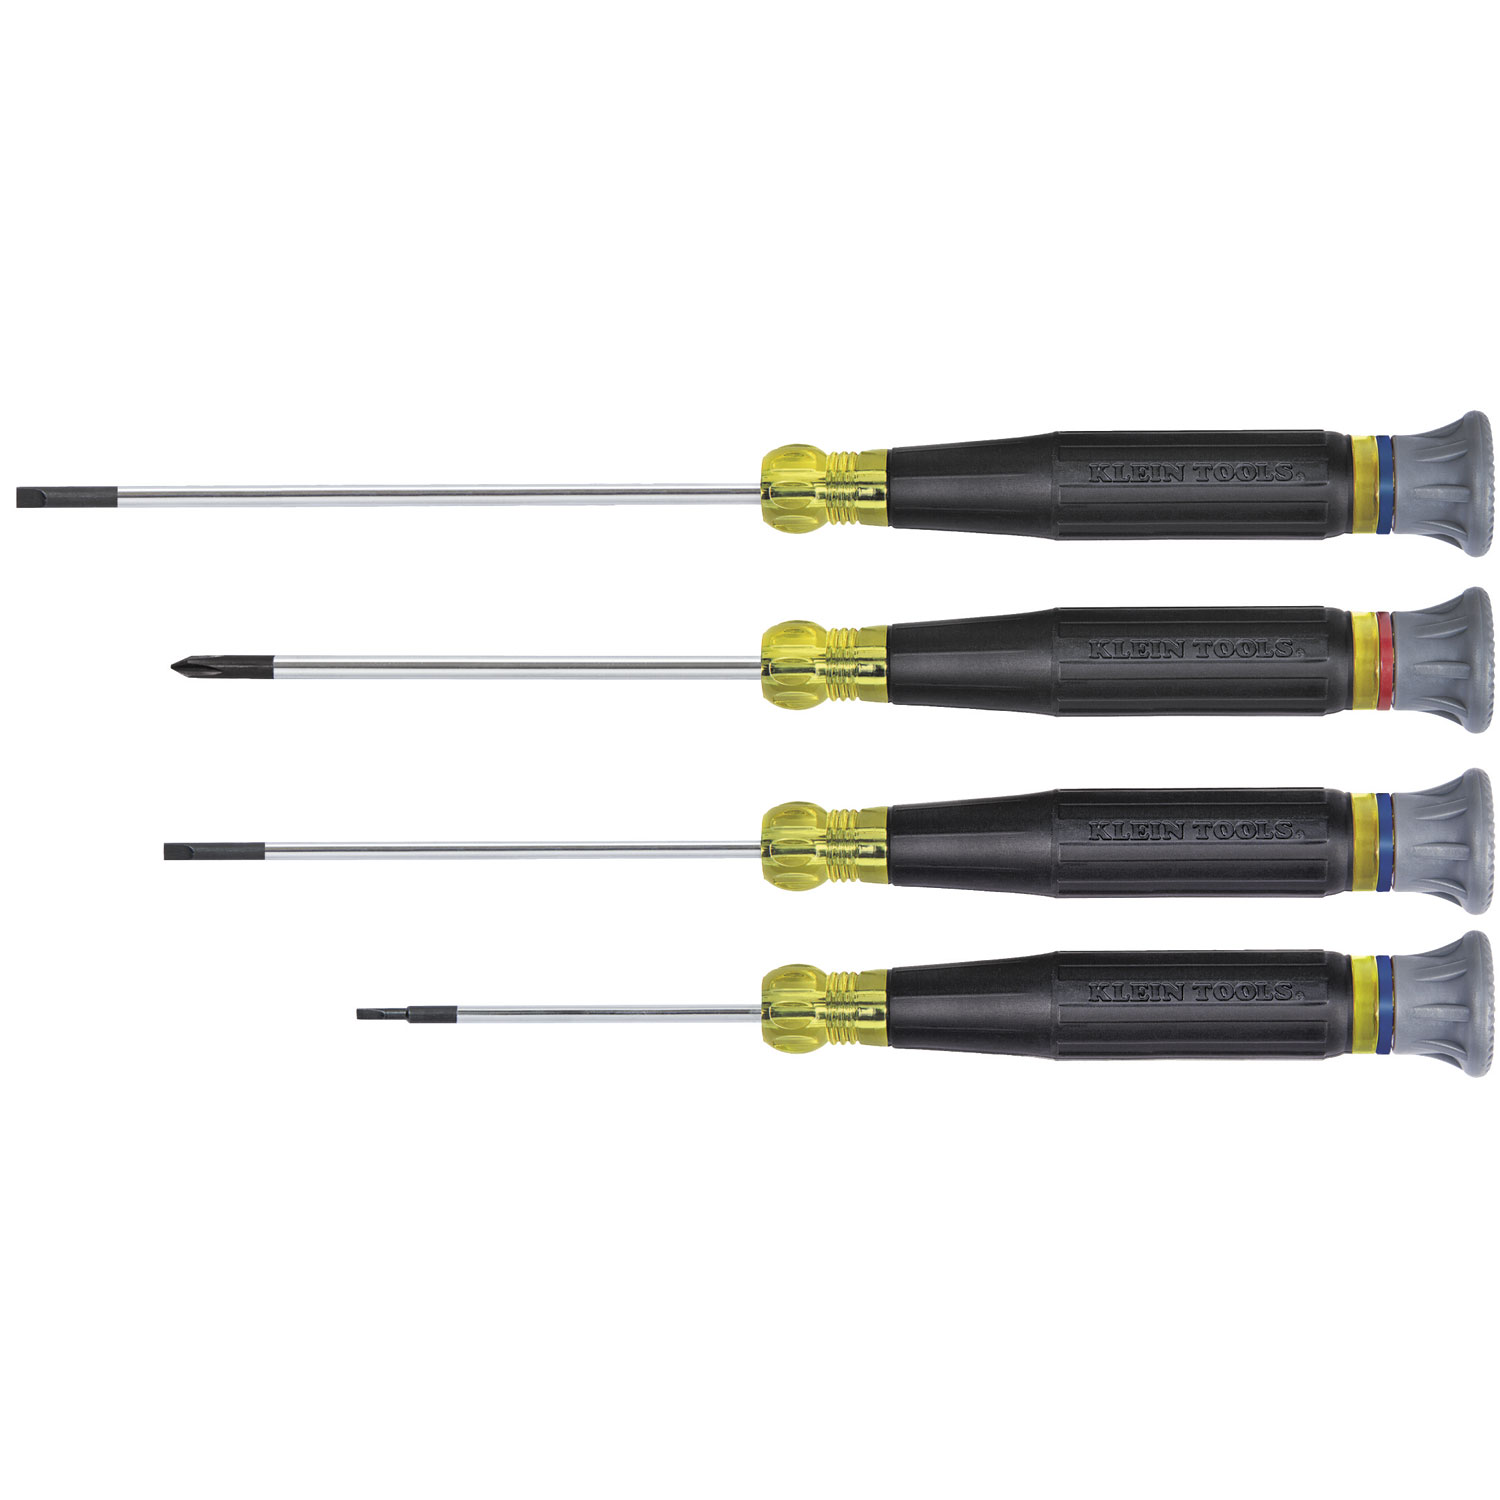 85613 Screwdriver Set, Electronics Slotted and Phillips, 4-Piece - Image